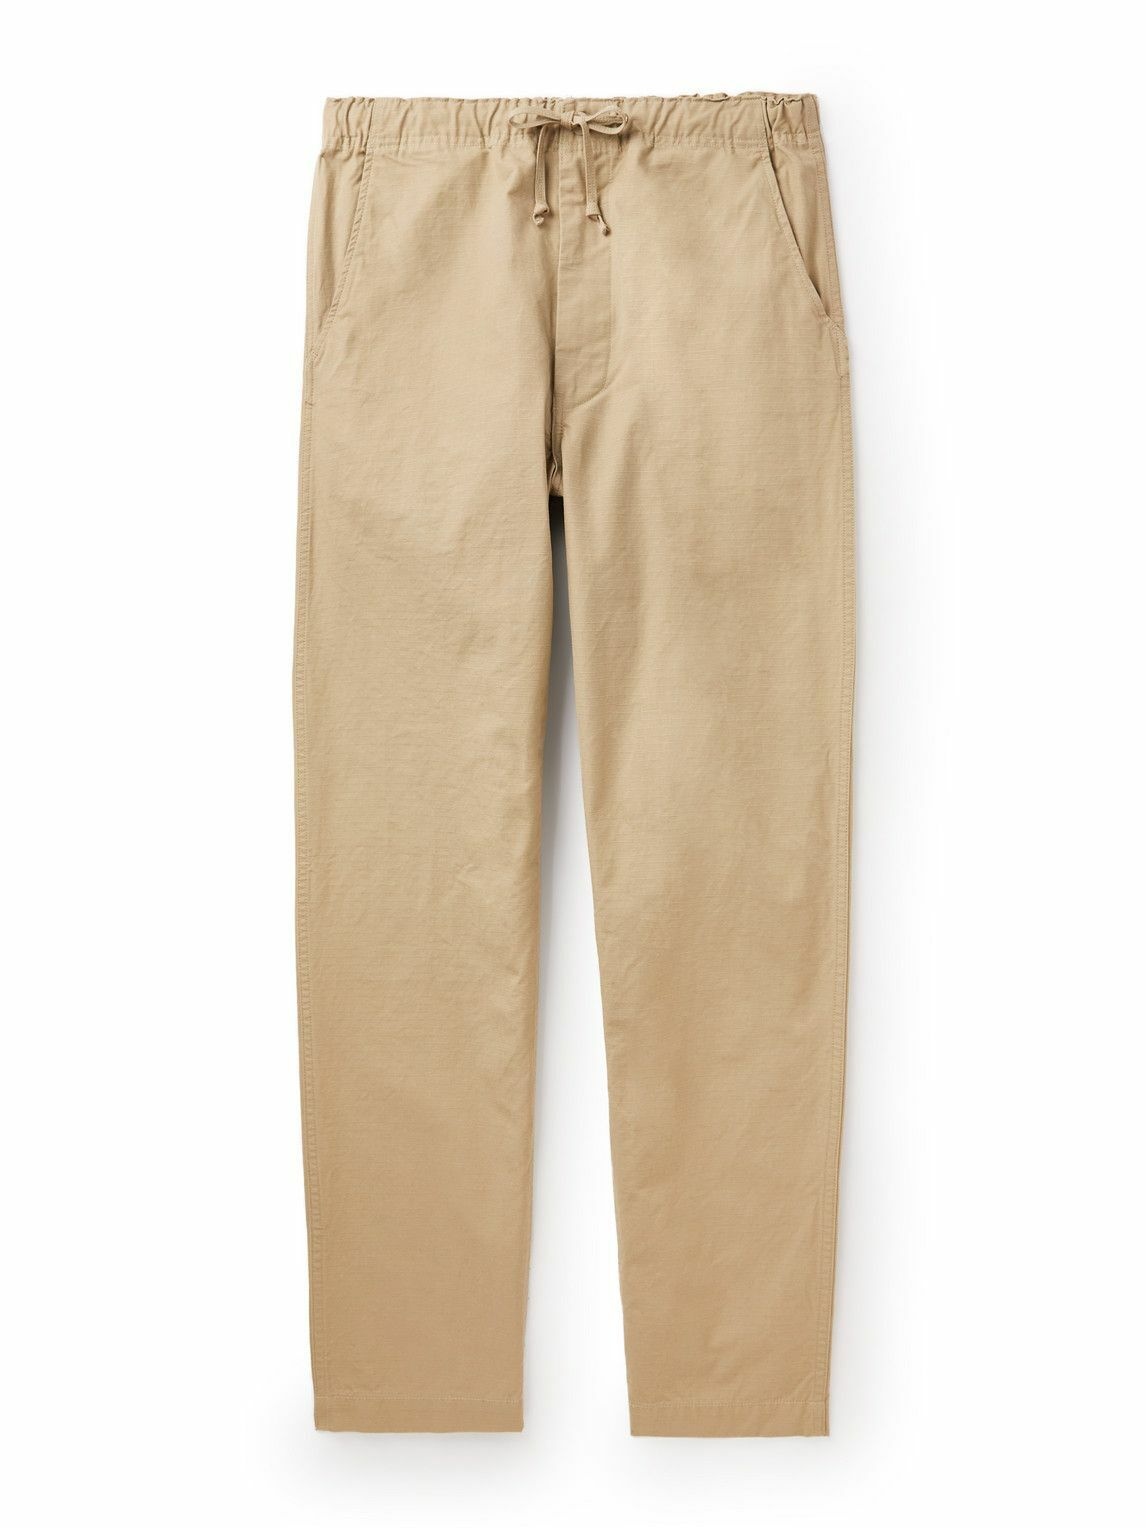 OrSlow - New Yorker Tapered Cotton-Ripstop Trousers - Neutrals orSlow